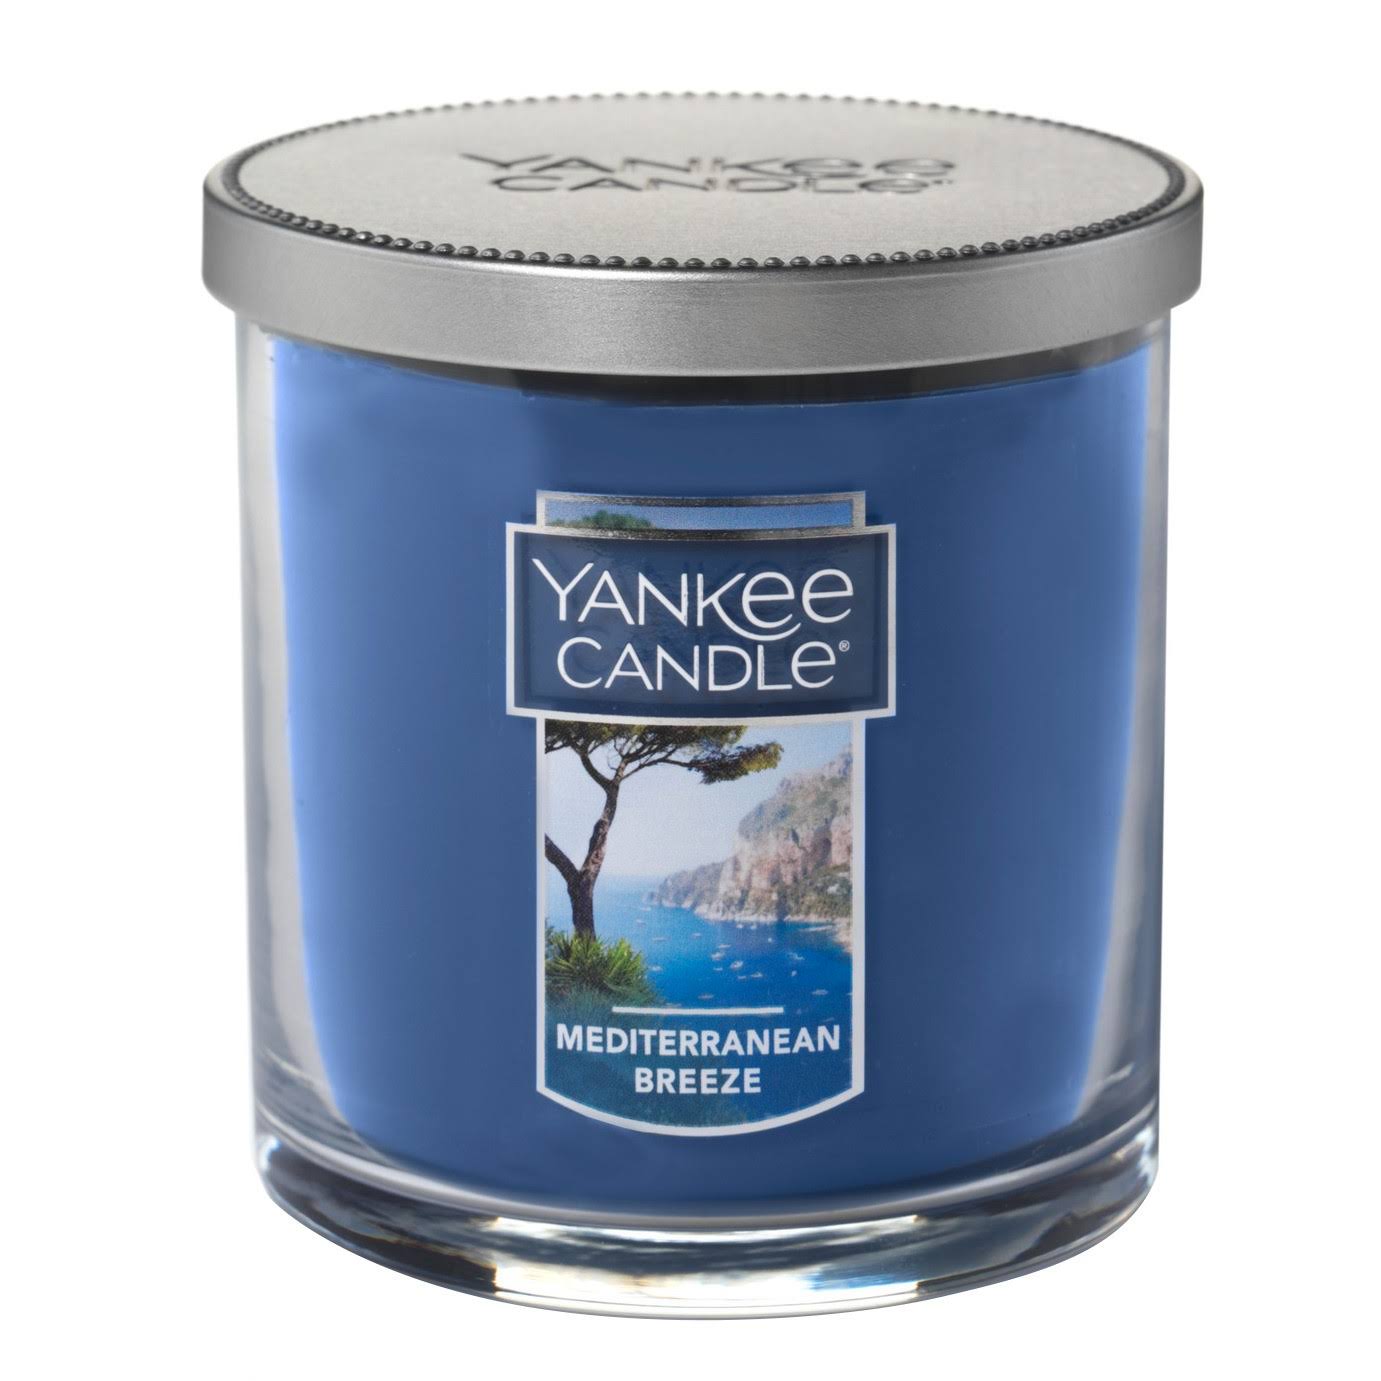 Yankee Candle Mediterranean Breeze Small Tumbler Candle